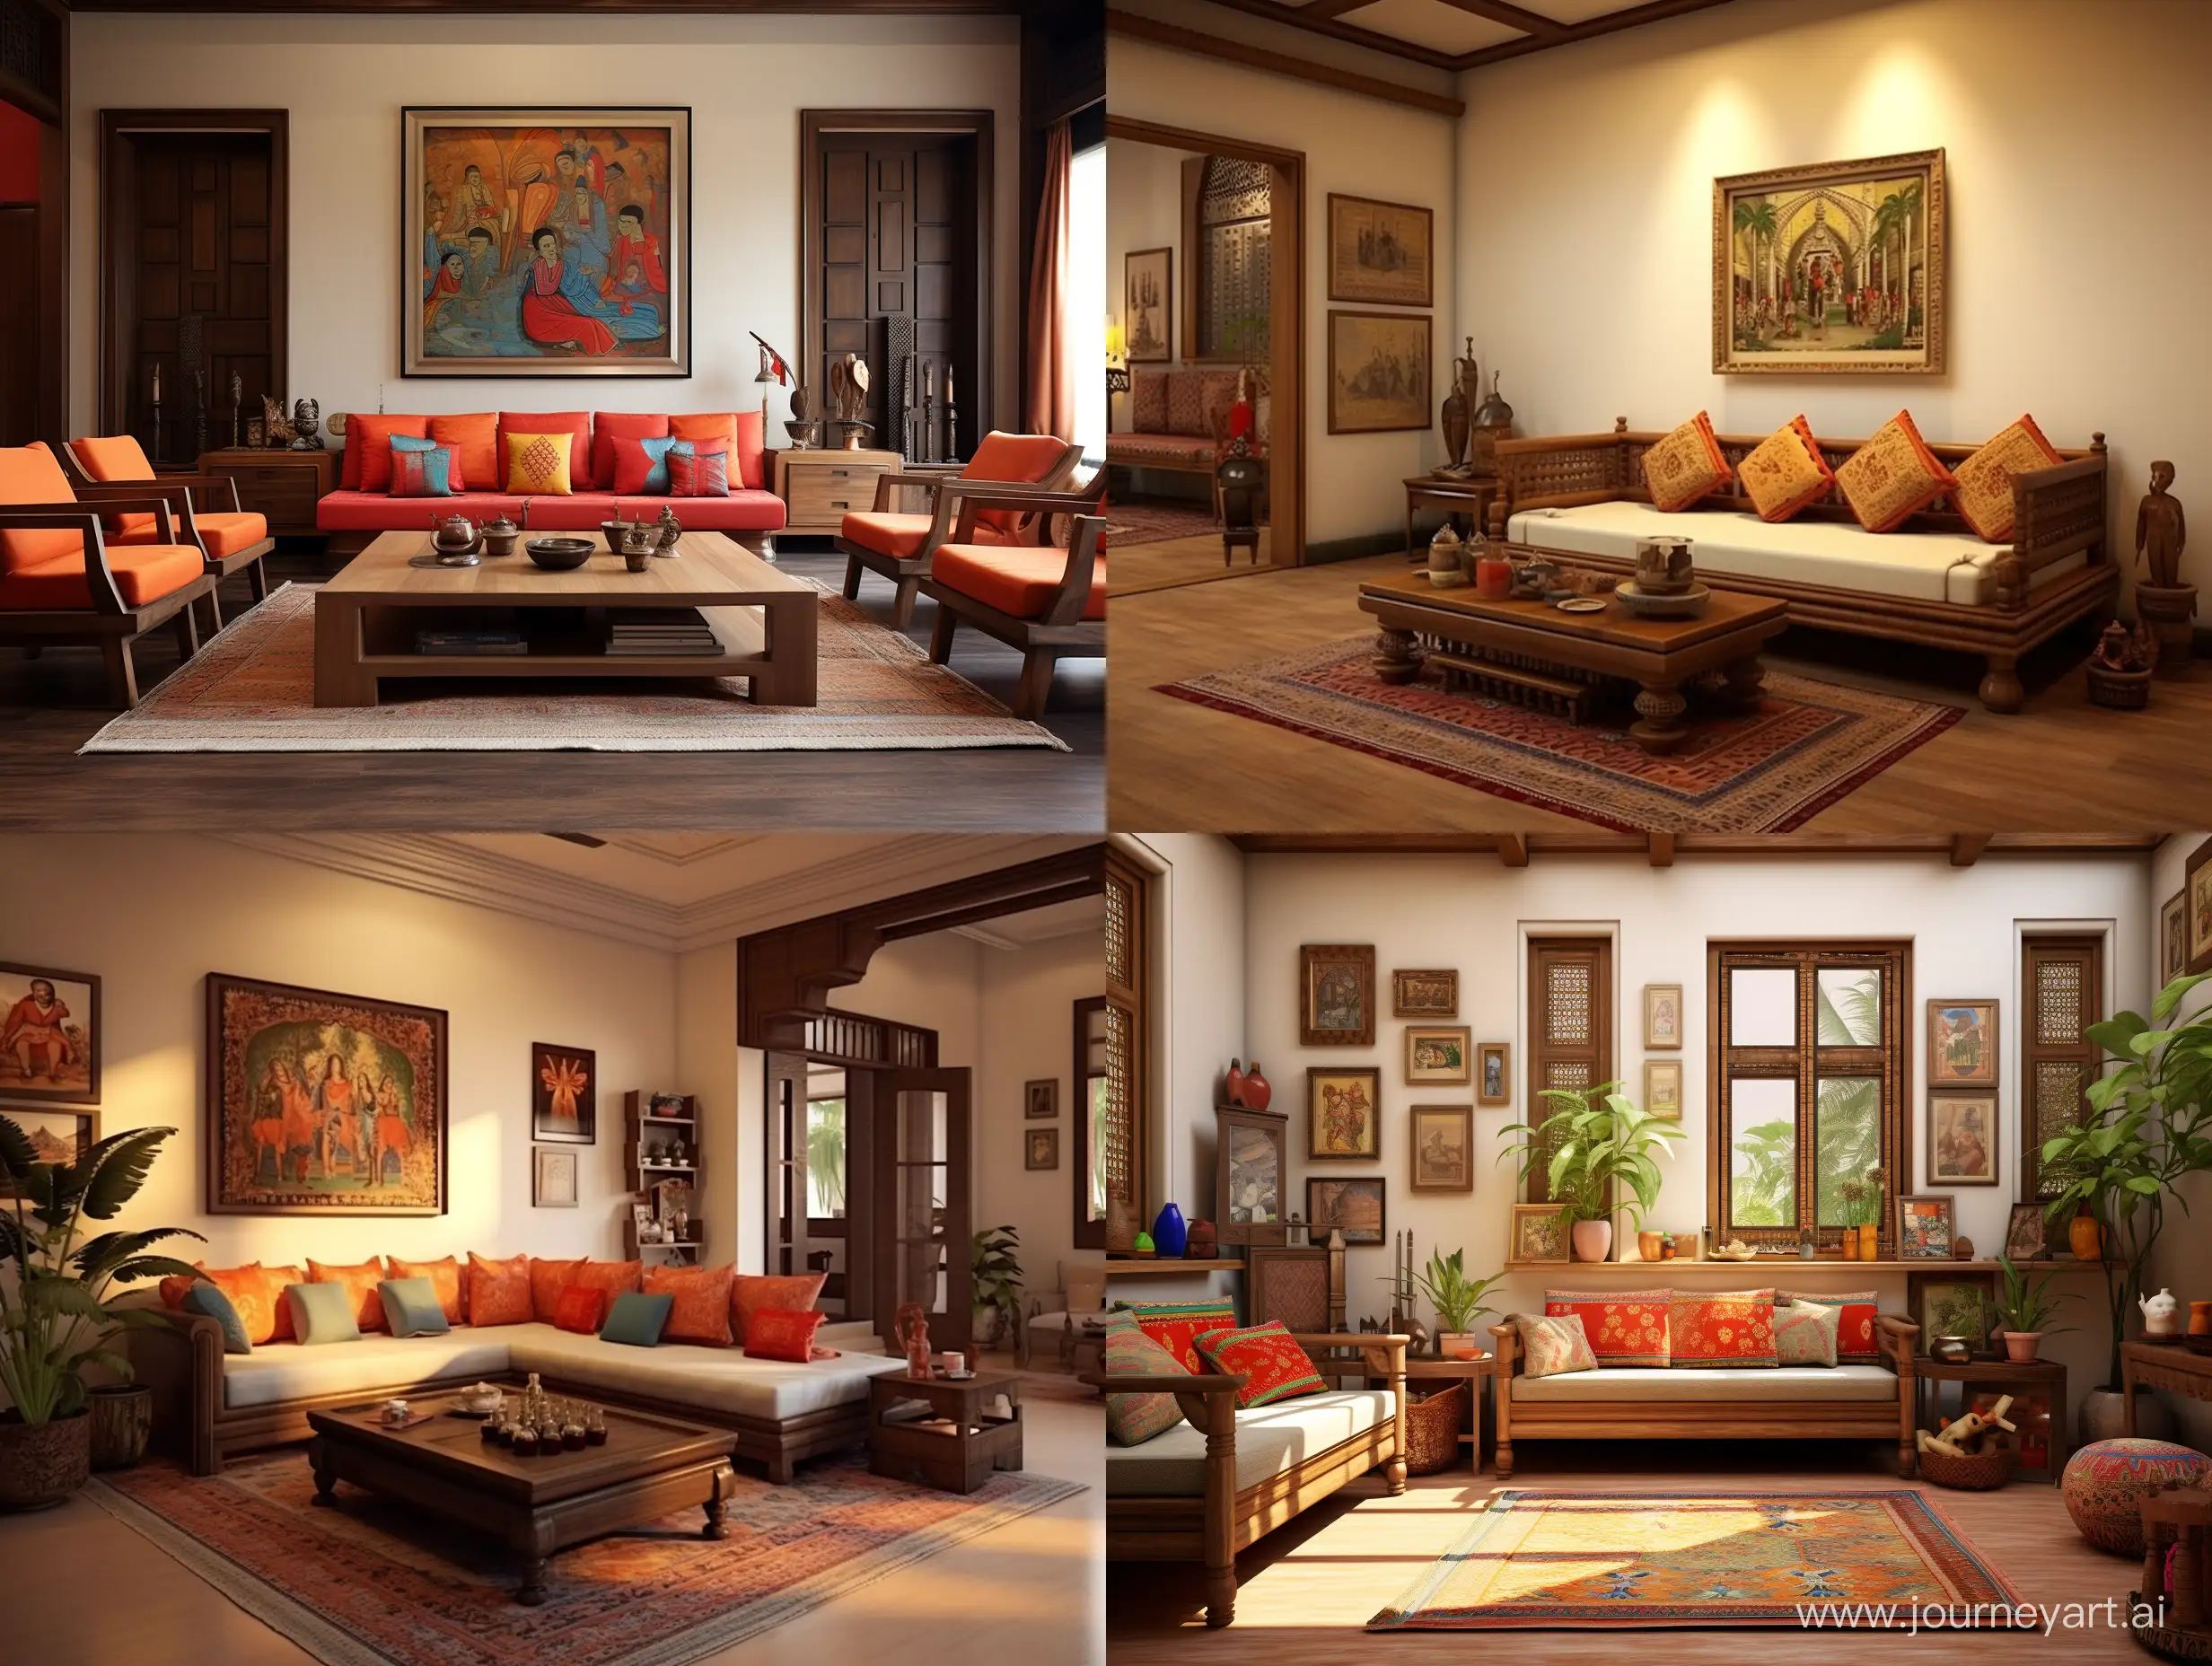 Vibrant-Indian-Living-Room-Scenes-10-HighQuality-AI-Images-AR-43-Image-Number-65156